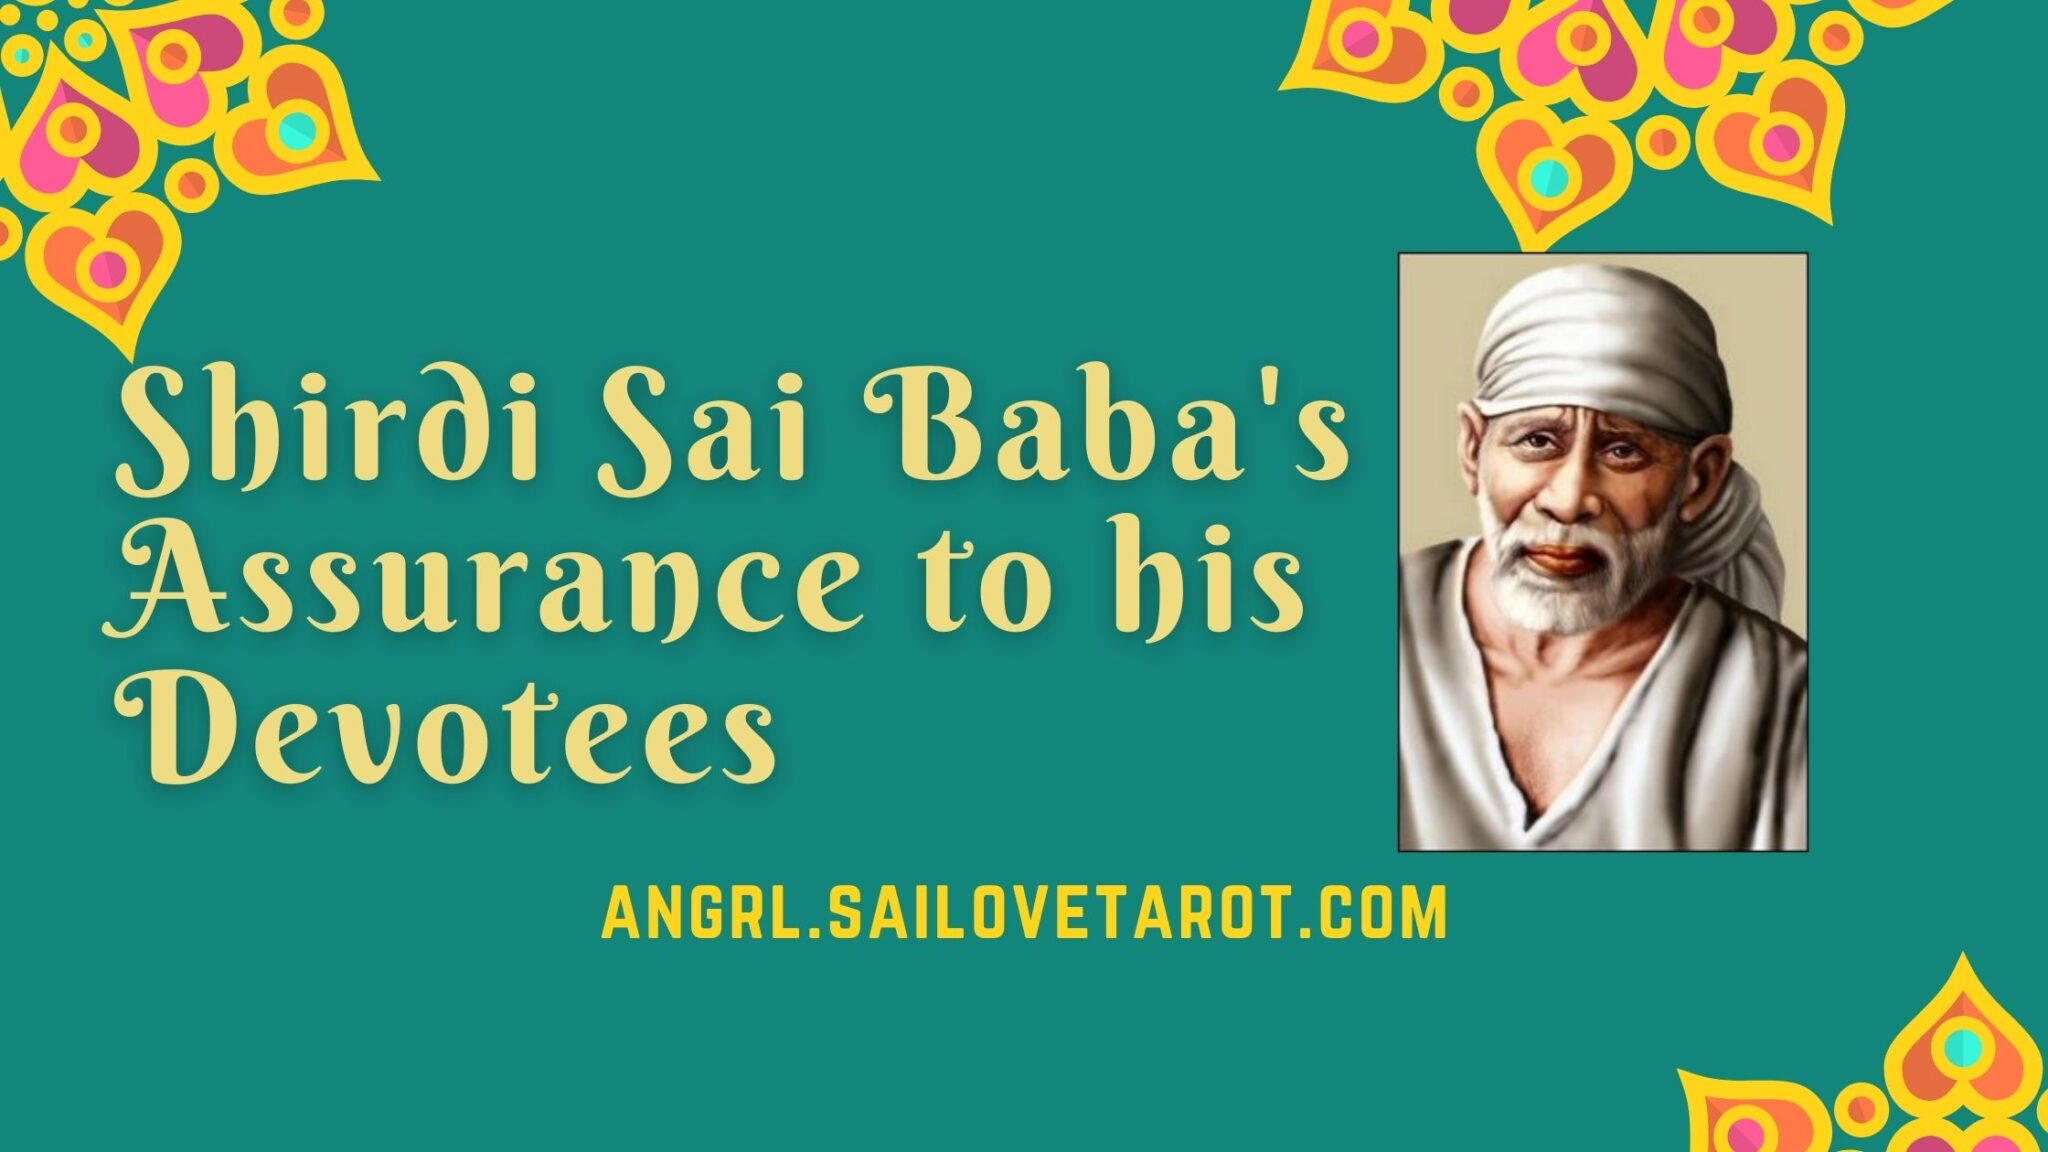 shirdi-sai-baba-s-assurance-to-his-devotees-angel-messages